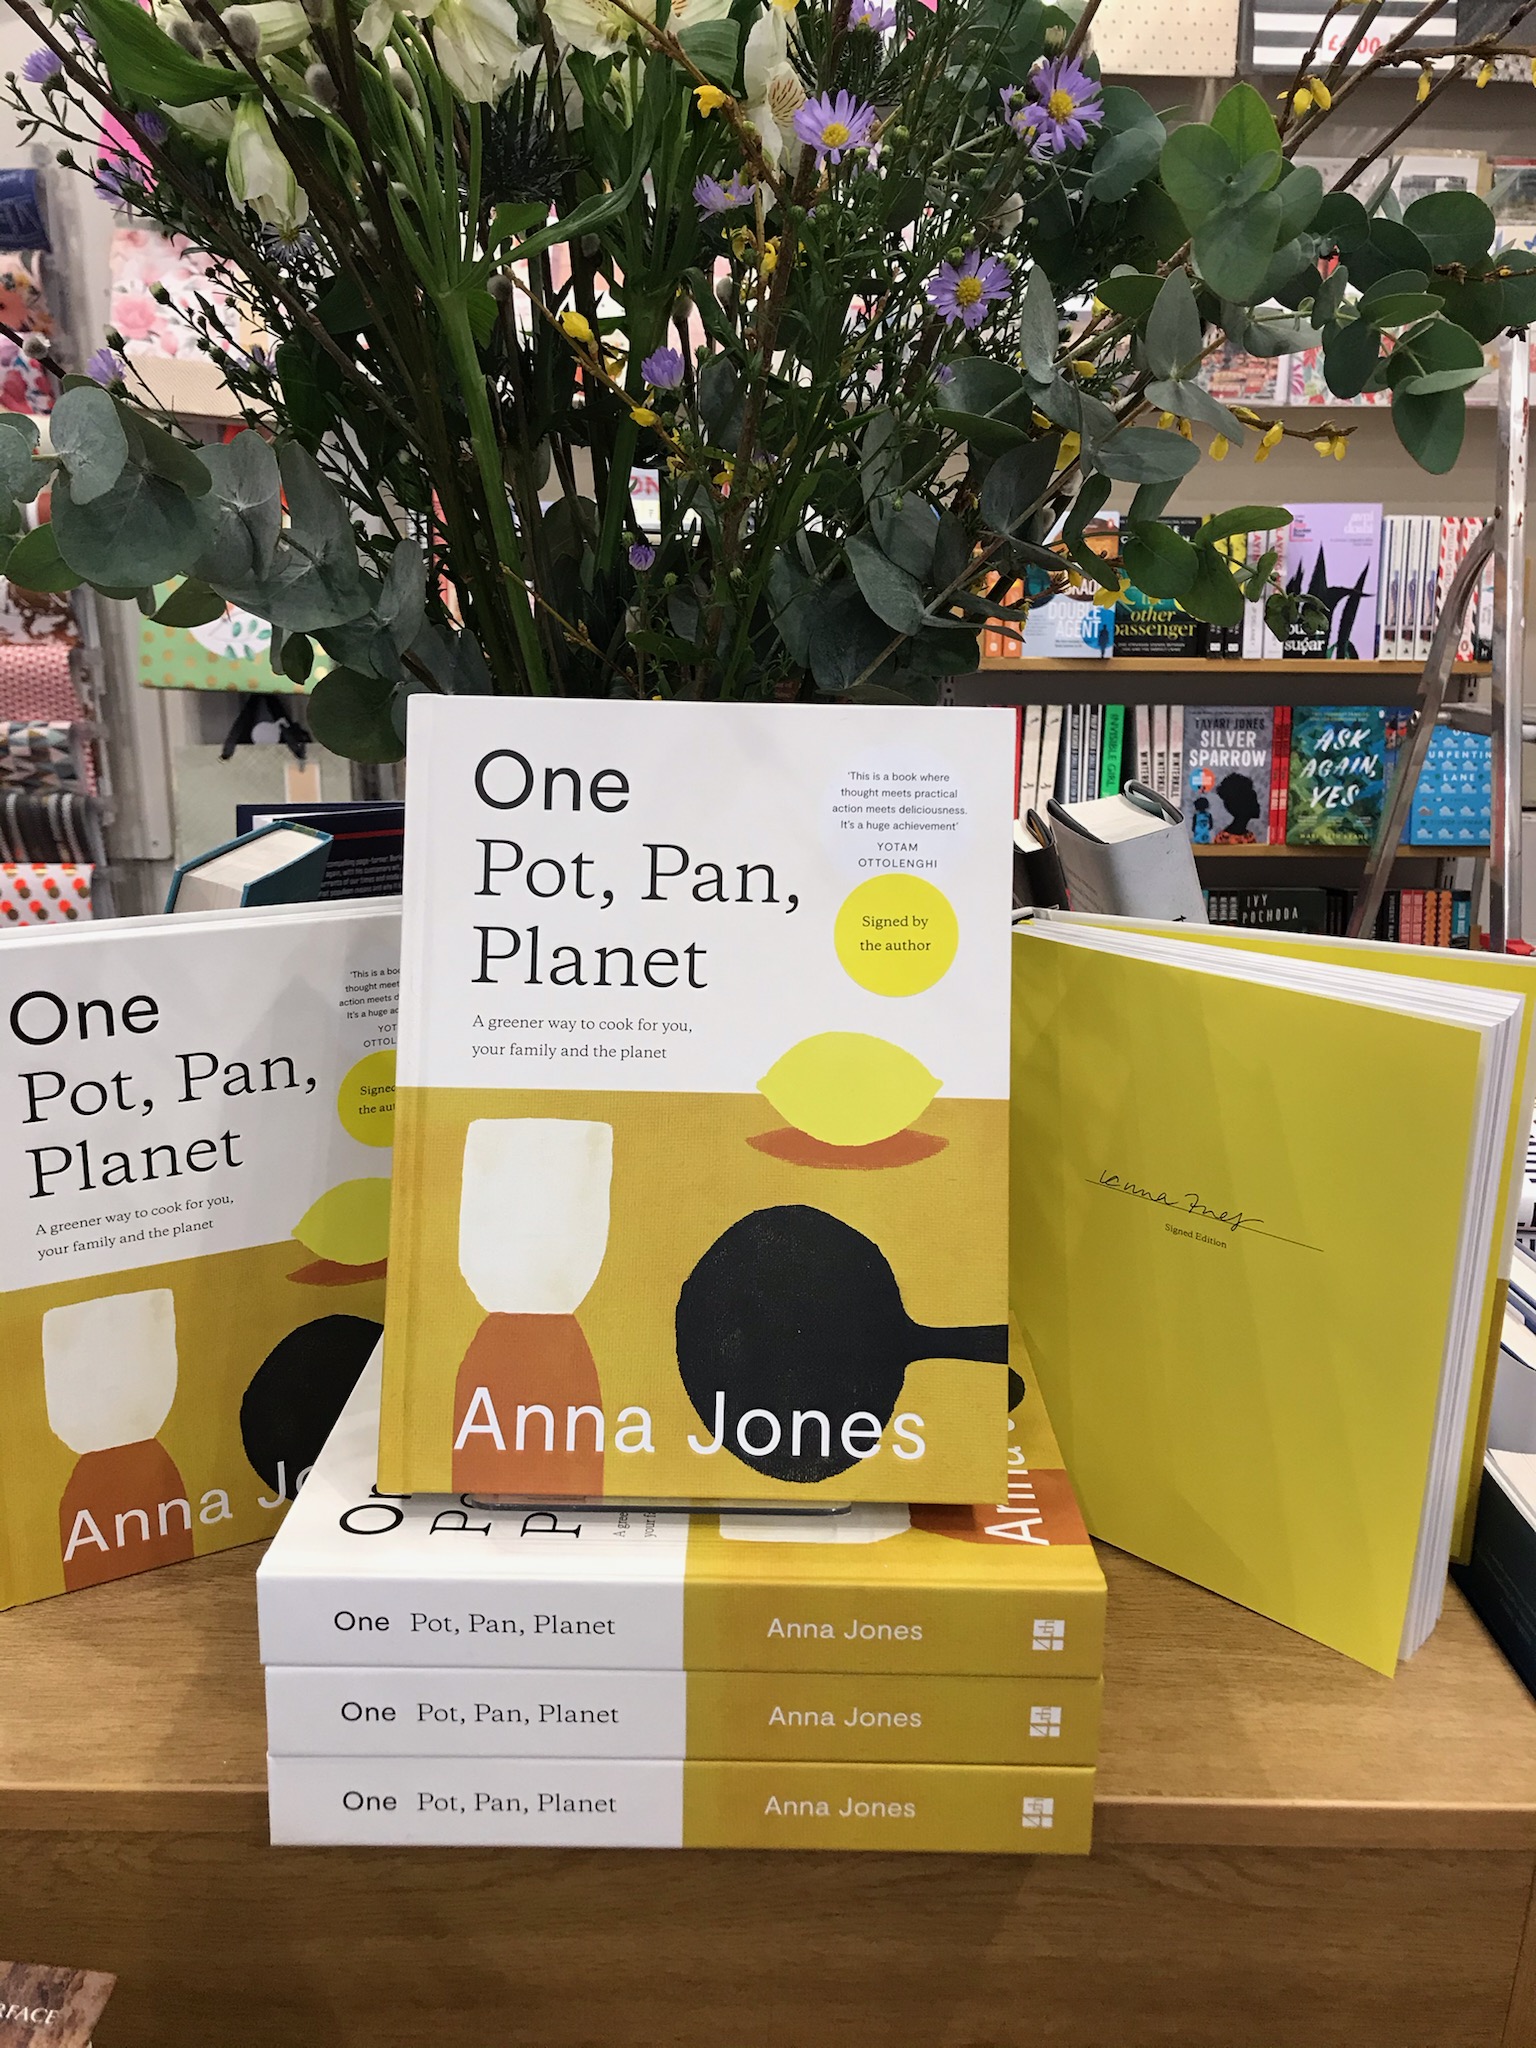 One: Pot, Pan, Planet: A Greener Way to Cook for You and Your Family: A Cookbook [Book]